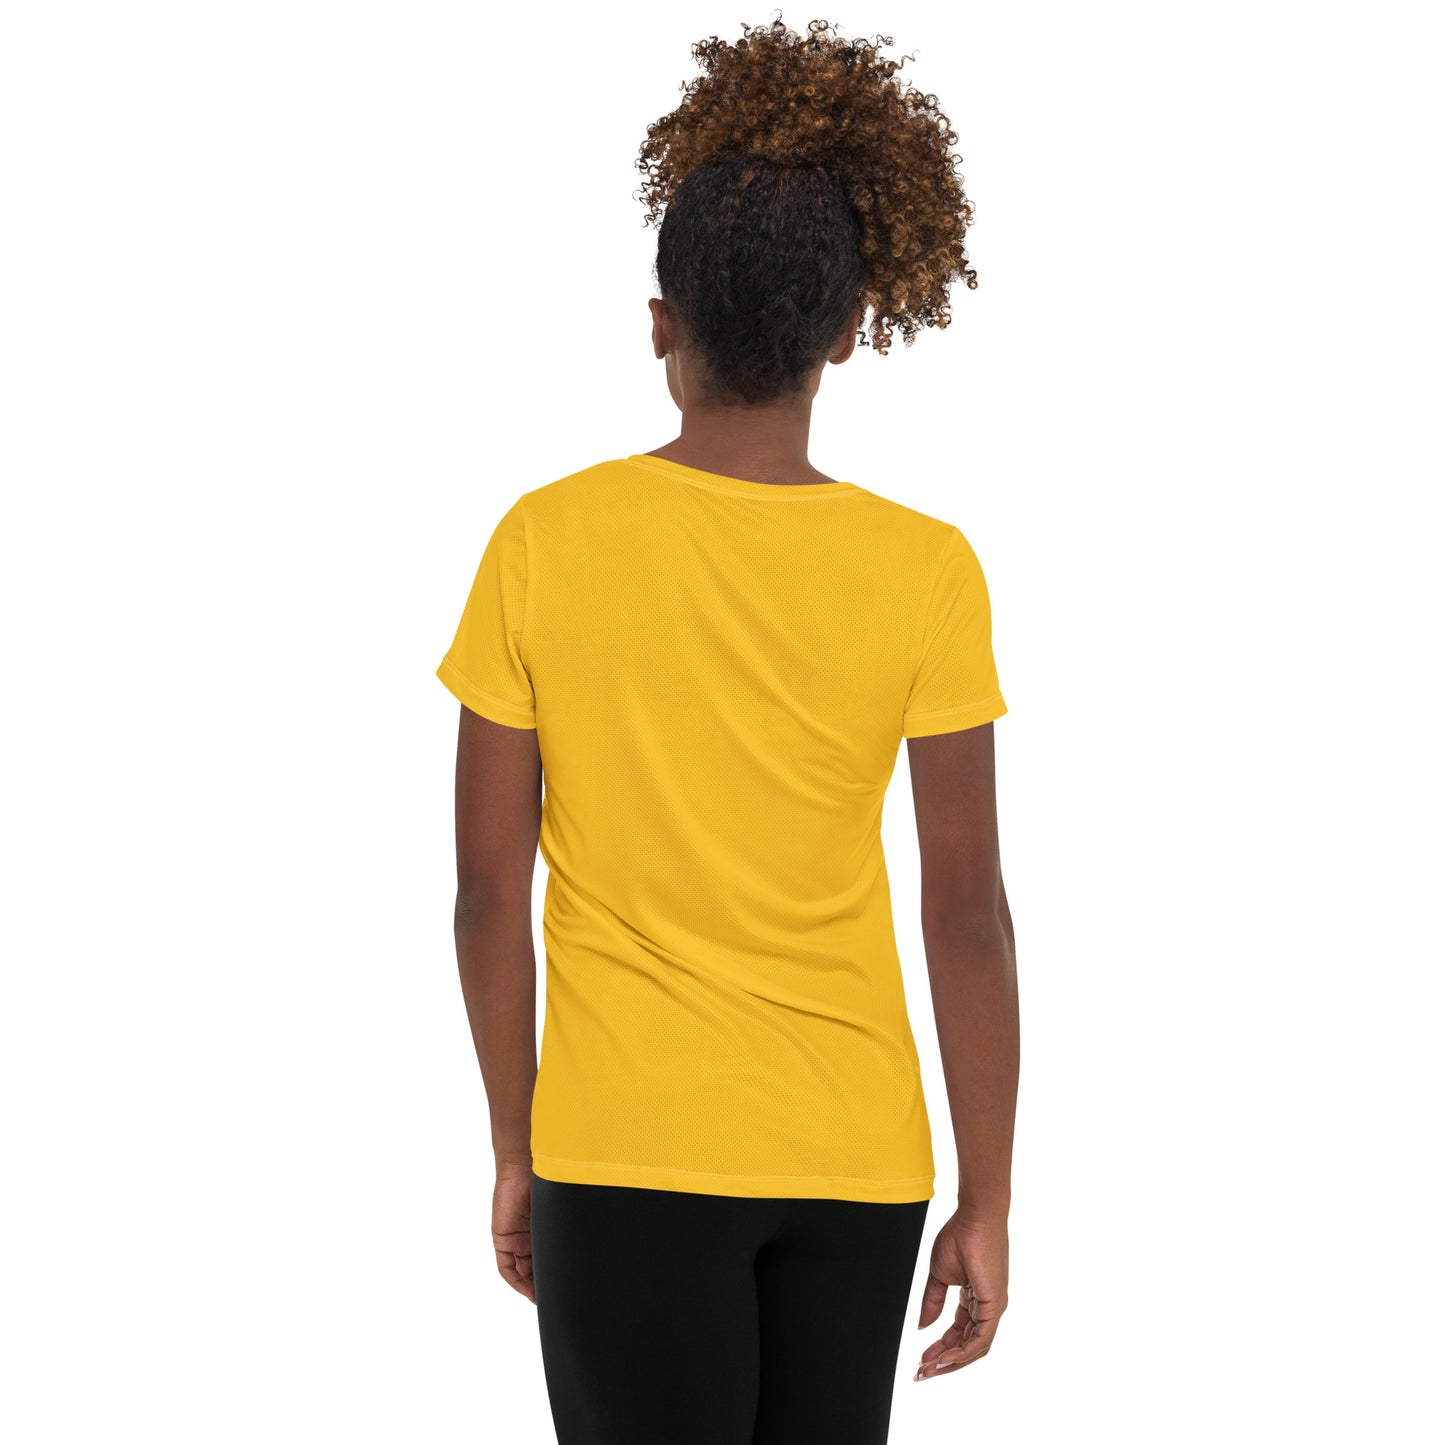 TIME OF VIBES - Women's Athletic T-shirt VIBES (Yellow) - €45.00